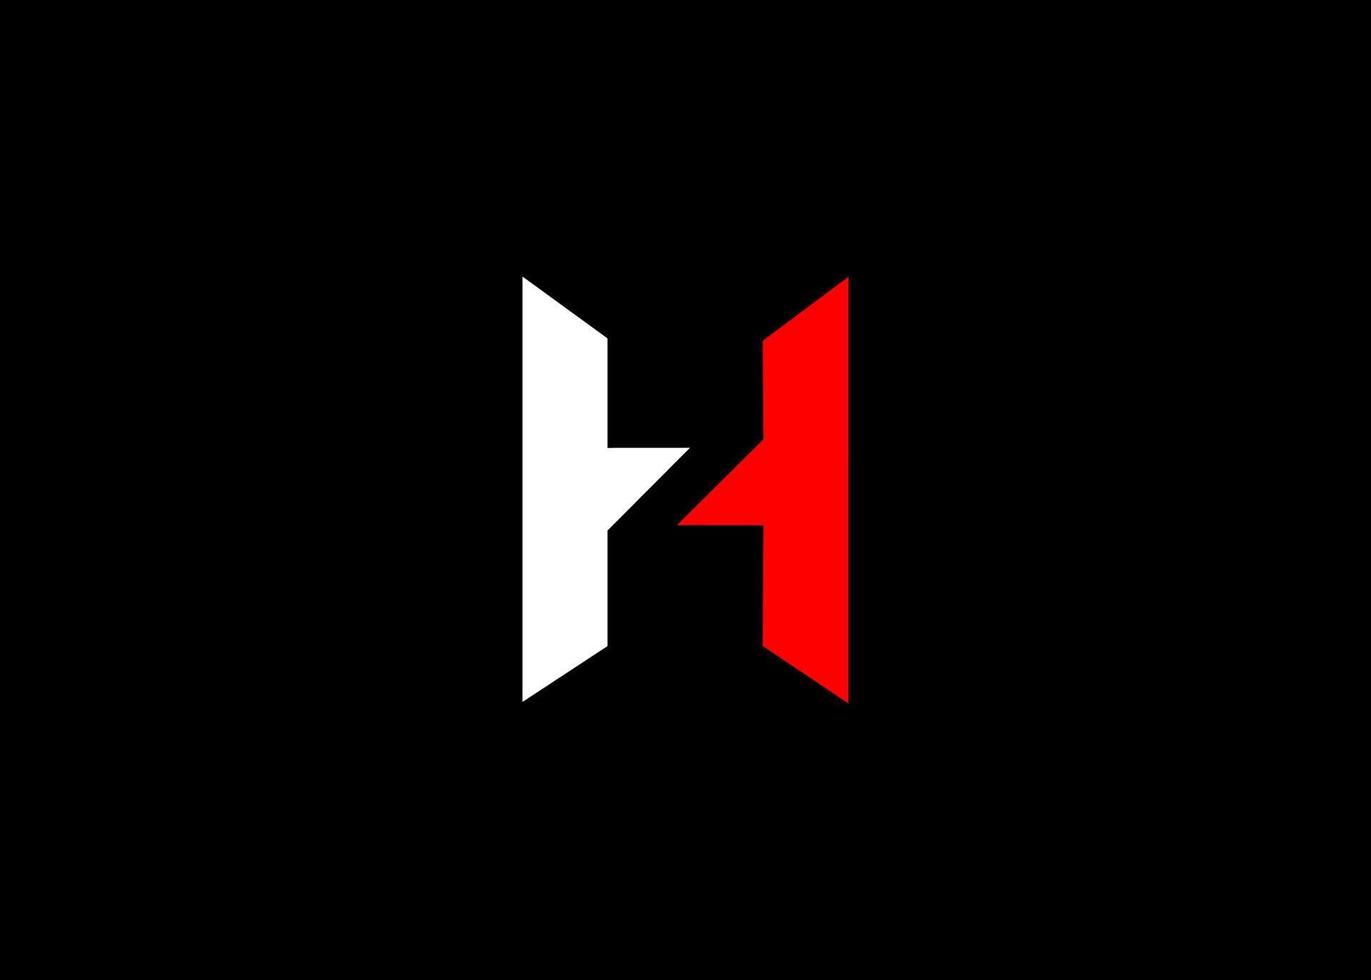 Beautiful simple letter H logo with hidden letter Z in the middle with red and white color, this is perfect logo for your company name or brand product vector